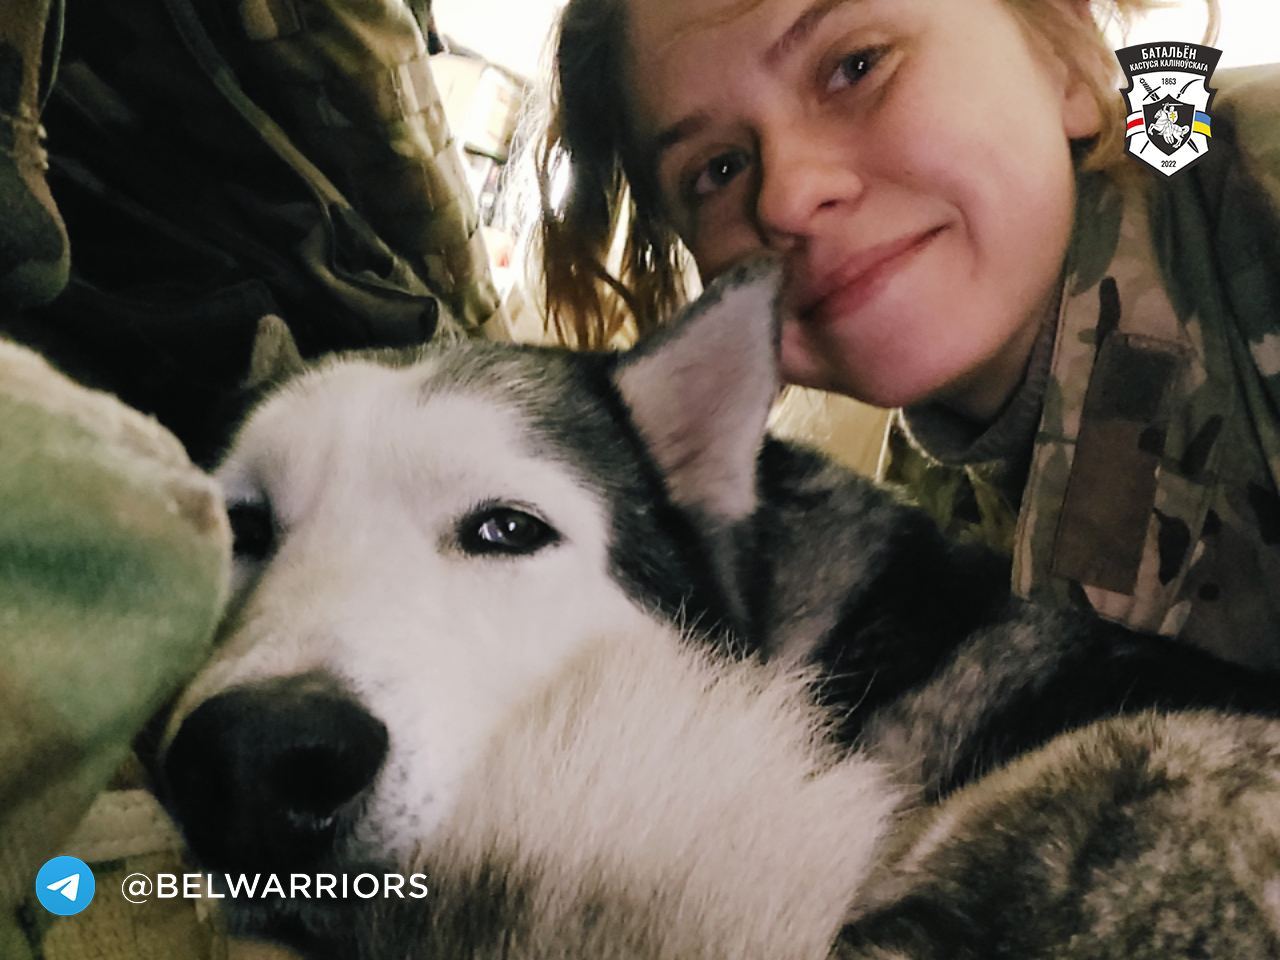 ukrainian solider smiling as she takes a selfie with a husky named nessie.